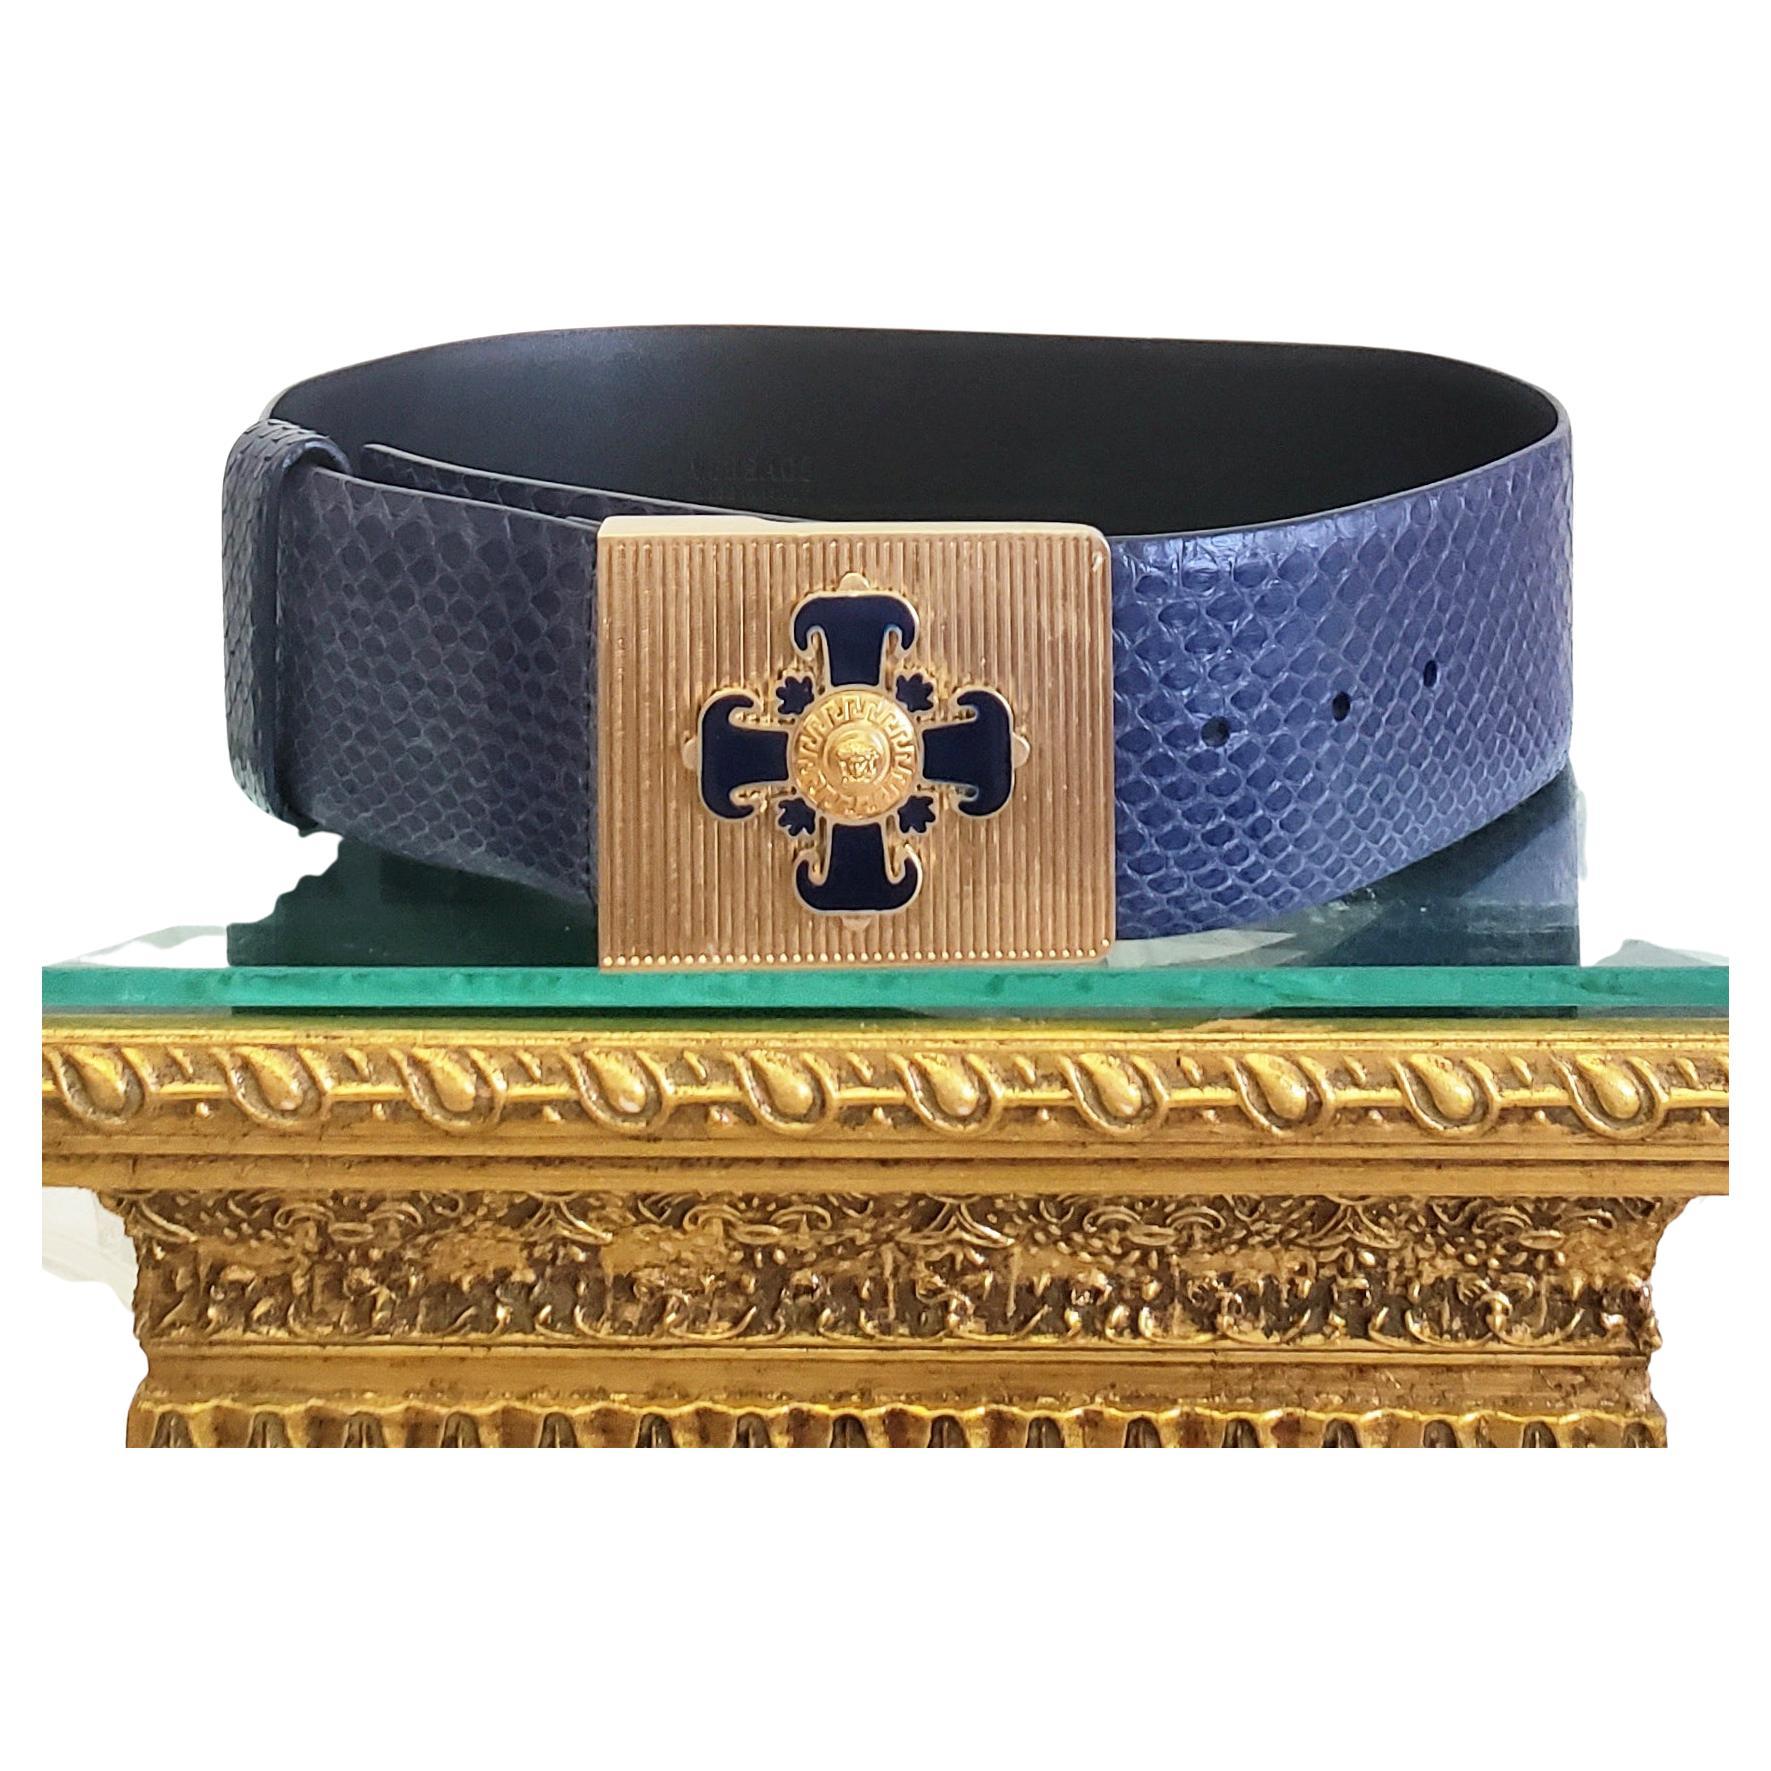 F/W 2011 Look #34 VERSACE RUNWAY NAVY BLUE PYTHON BELT with CROSS BUCKLE For Sale